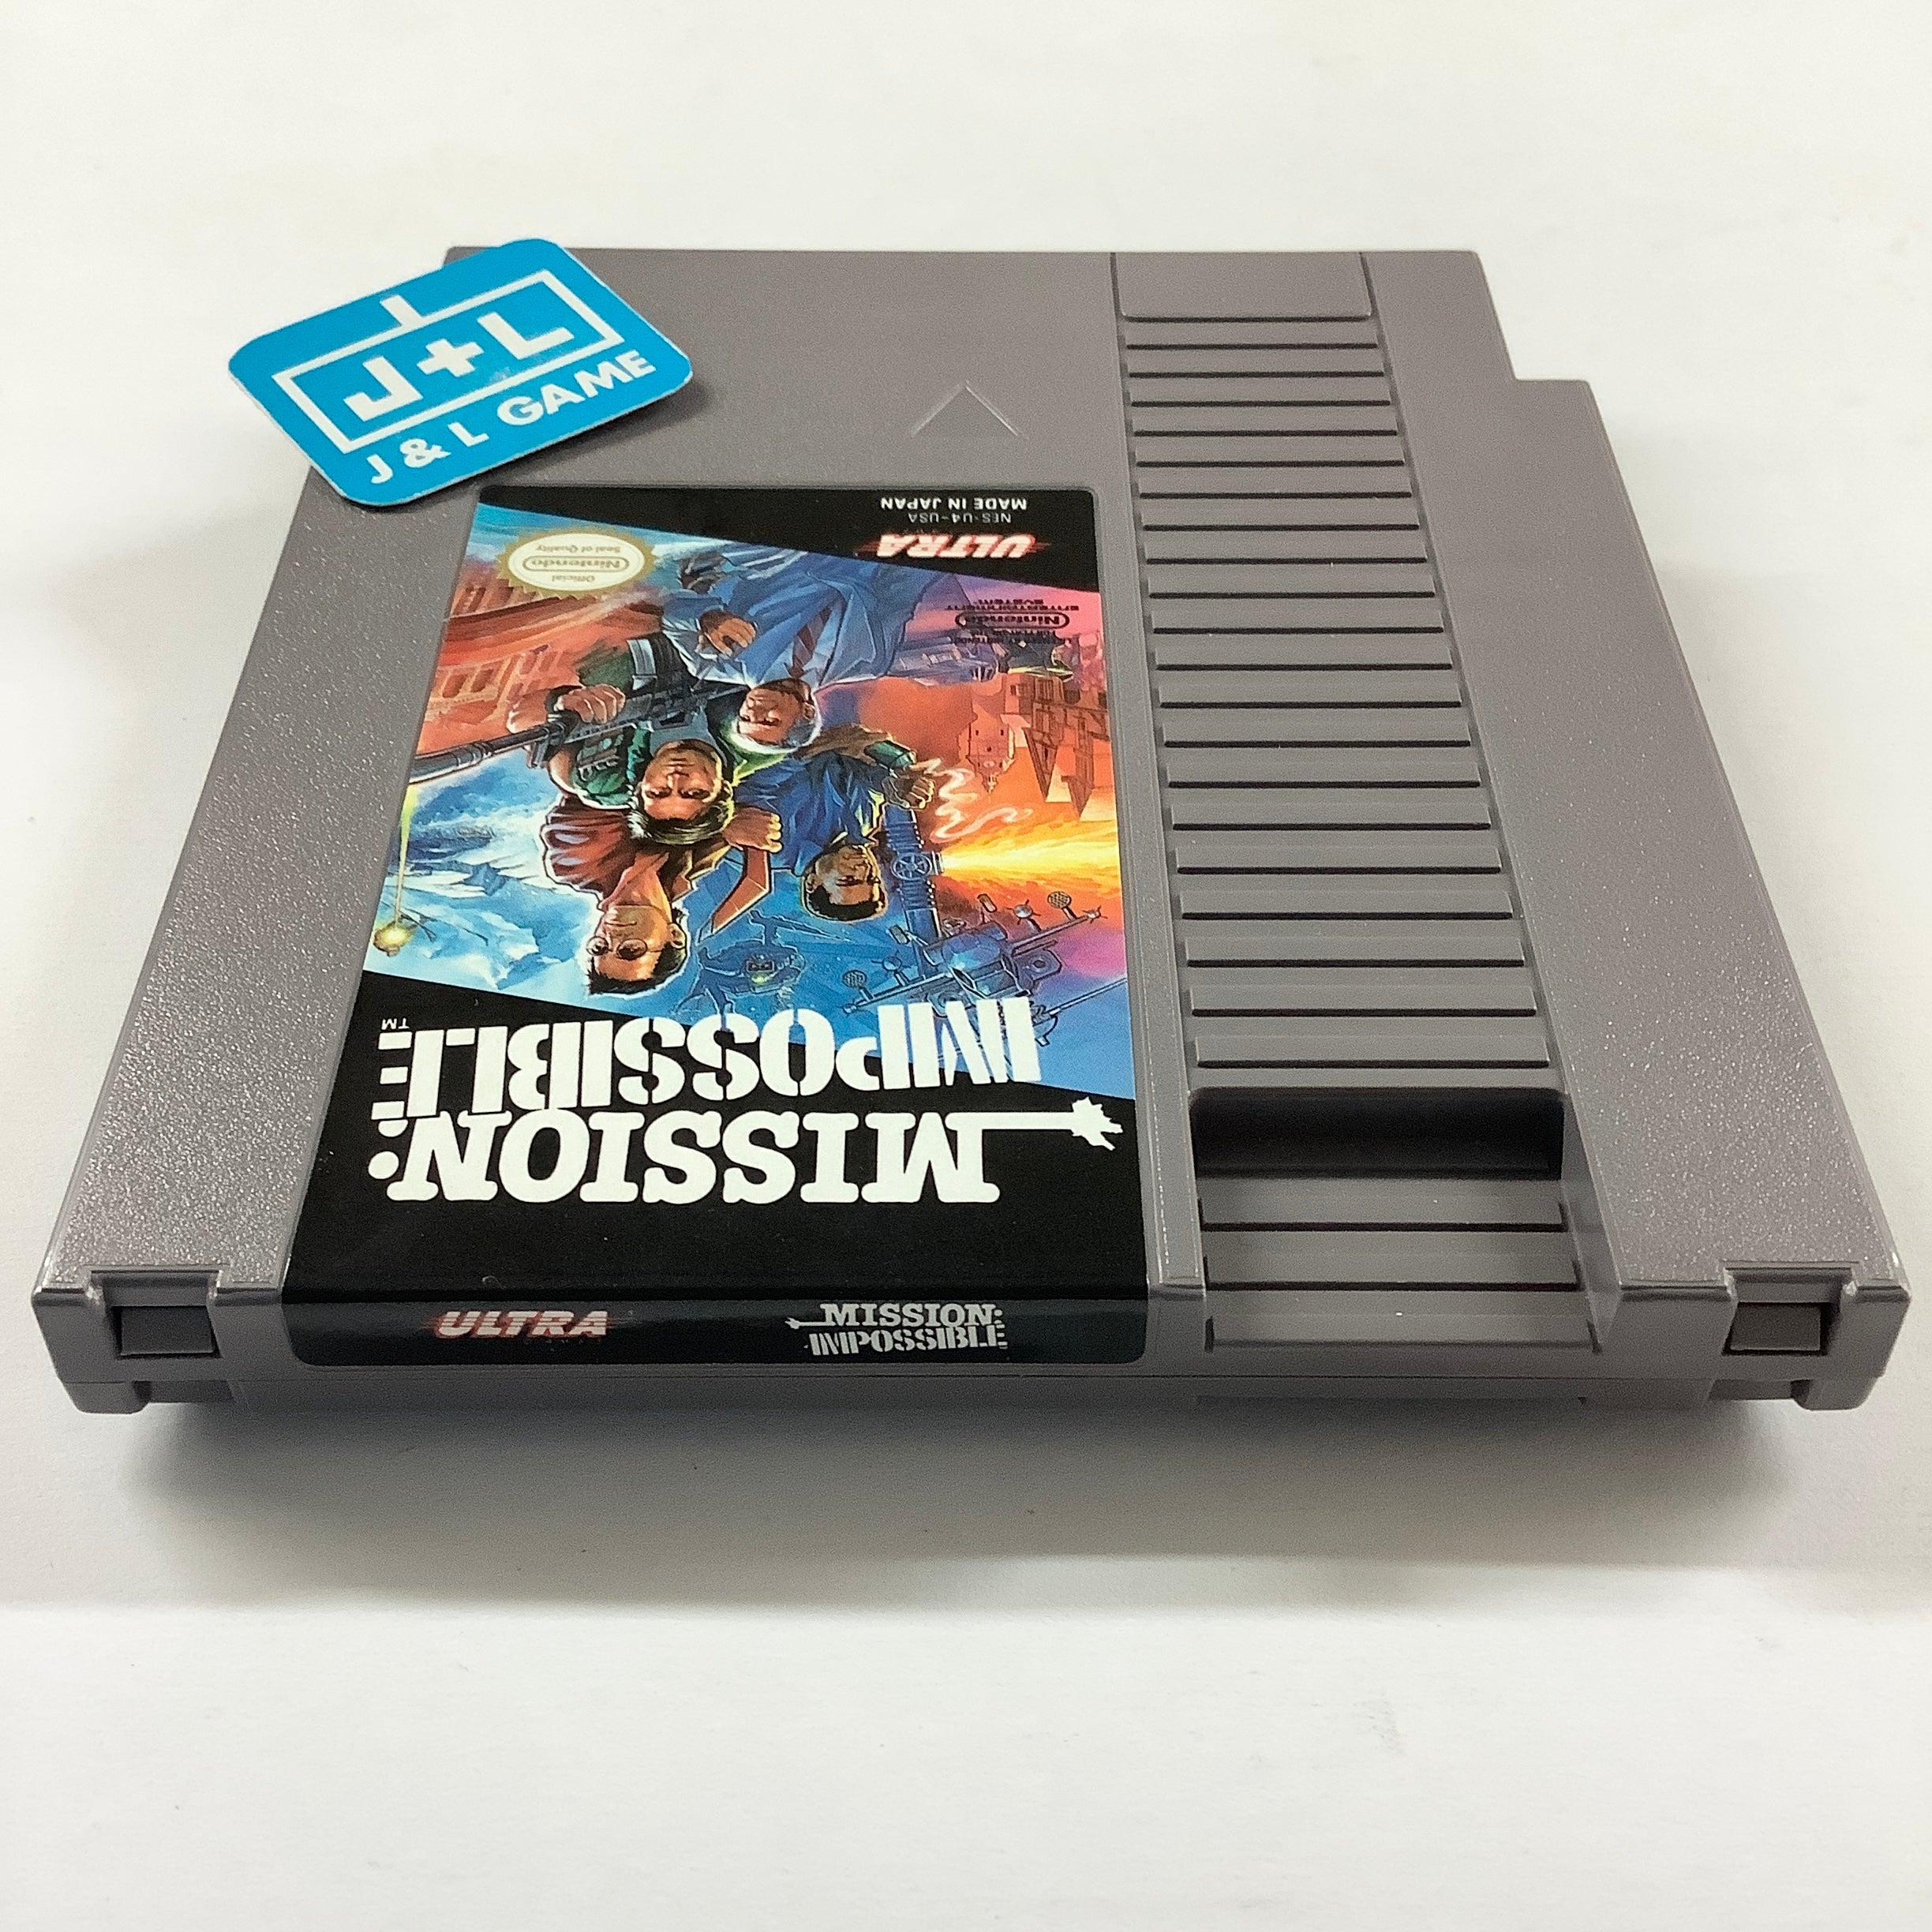 Mission: Impossible - (NES) Nintendo Entertainment System [Pre-Owned] Video Games Ultra   